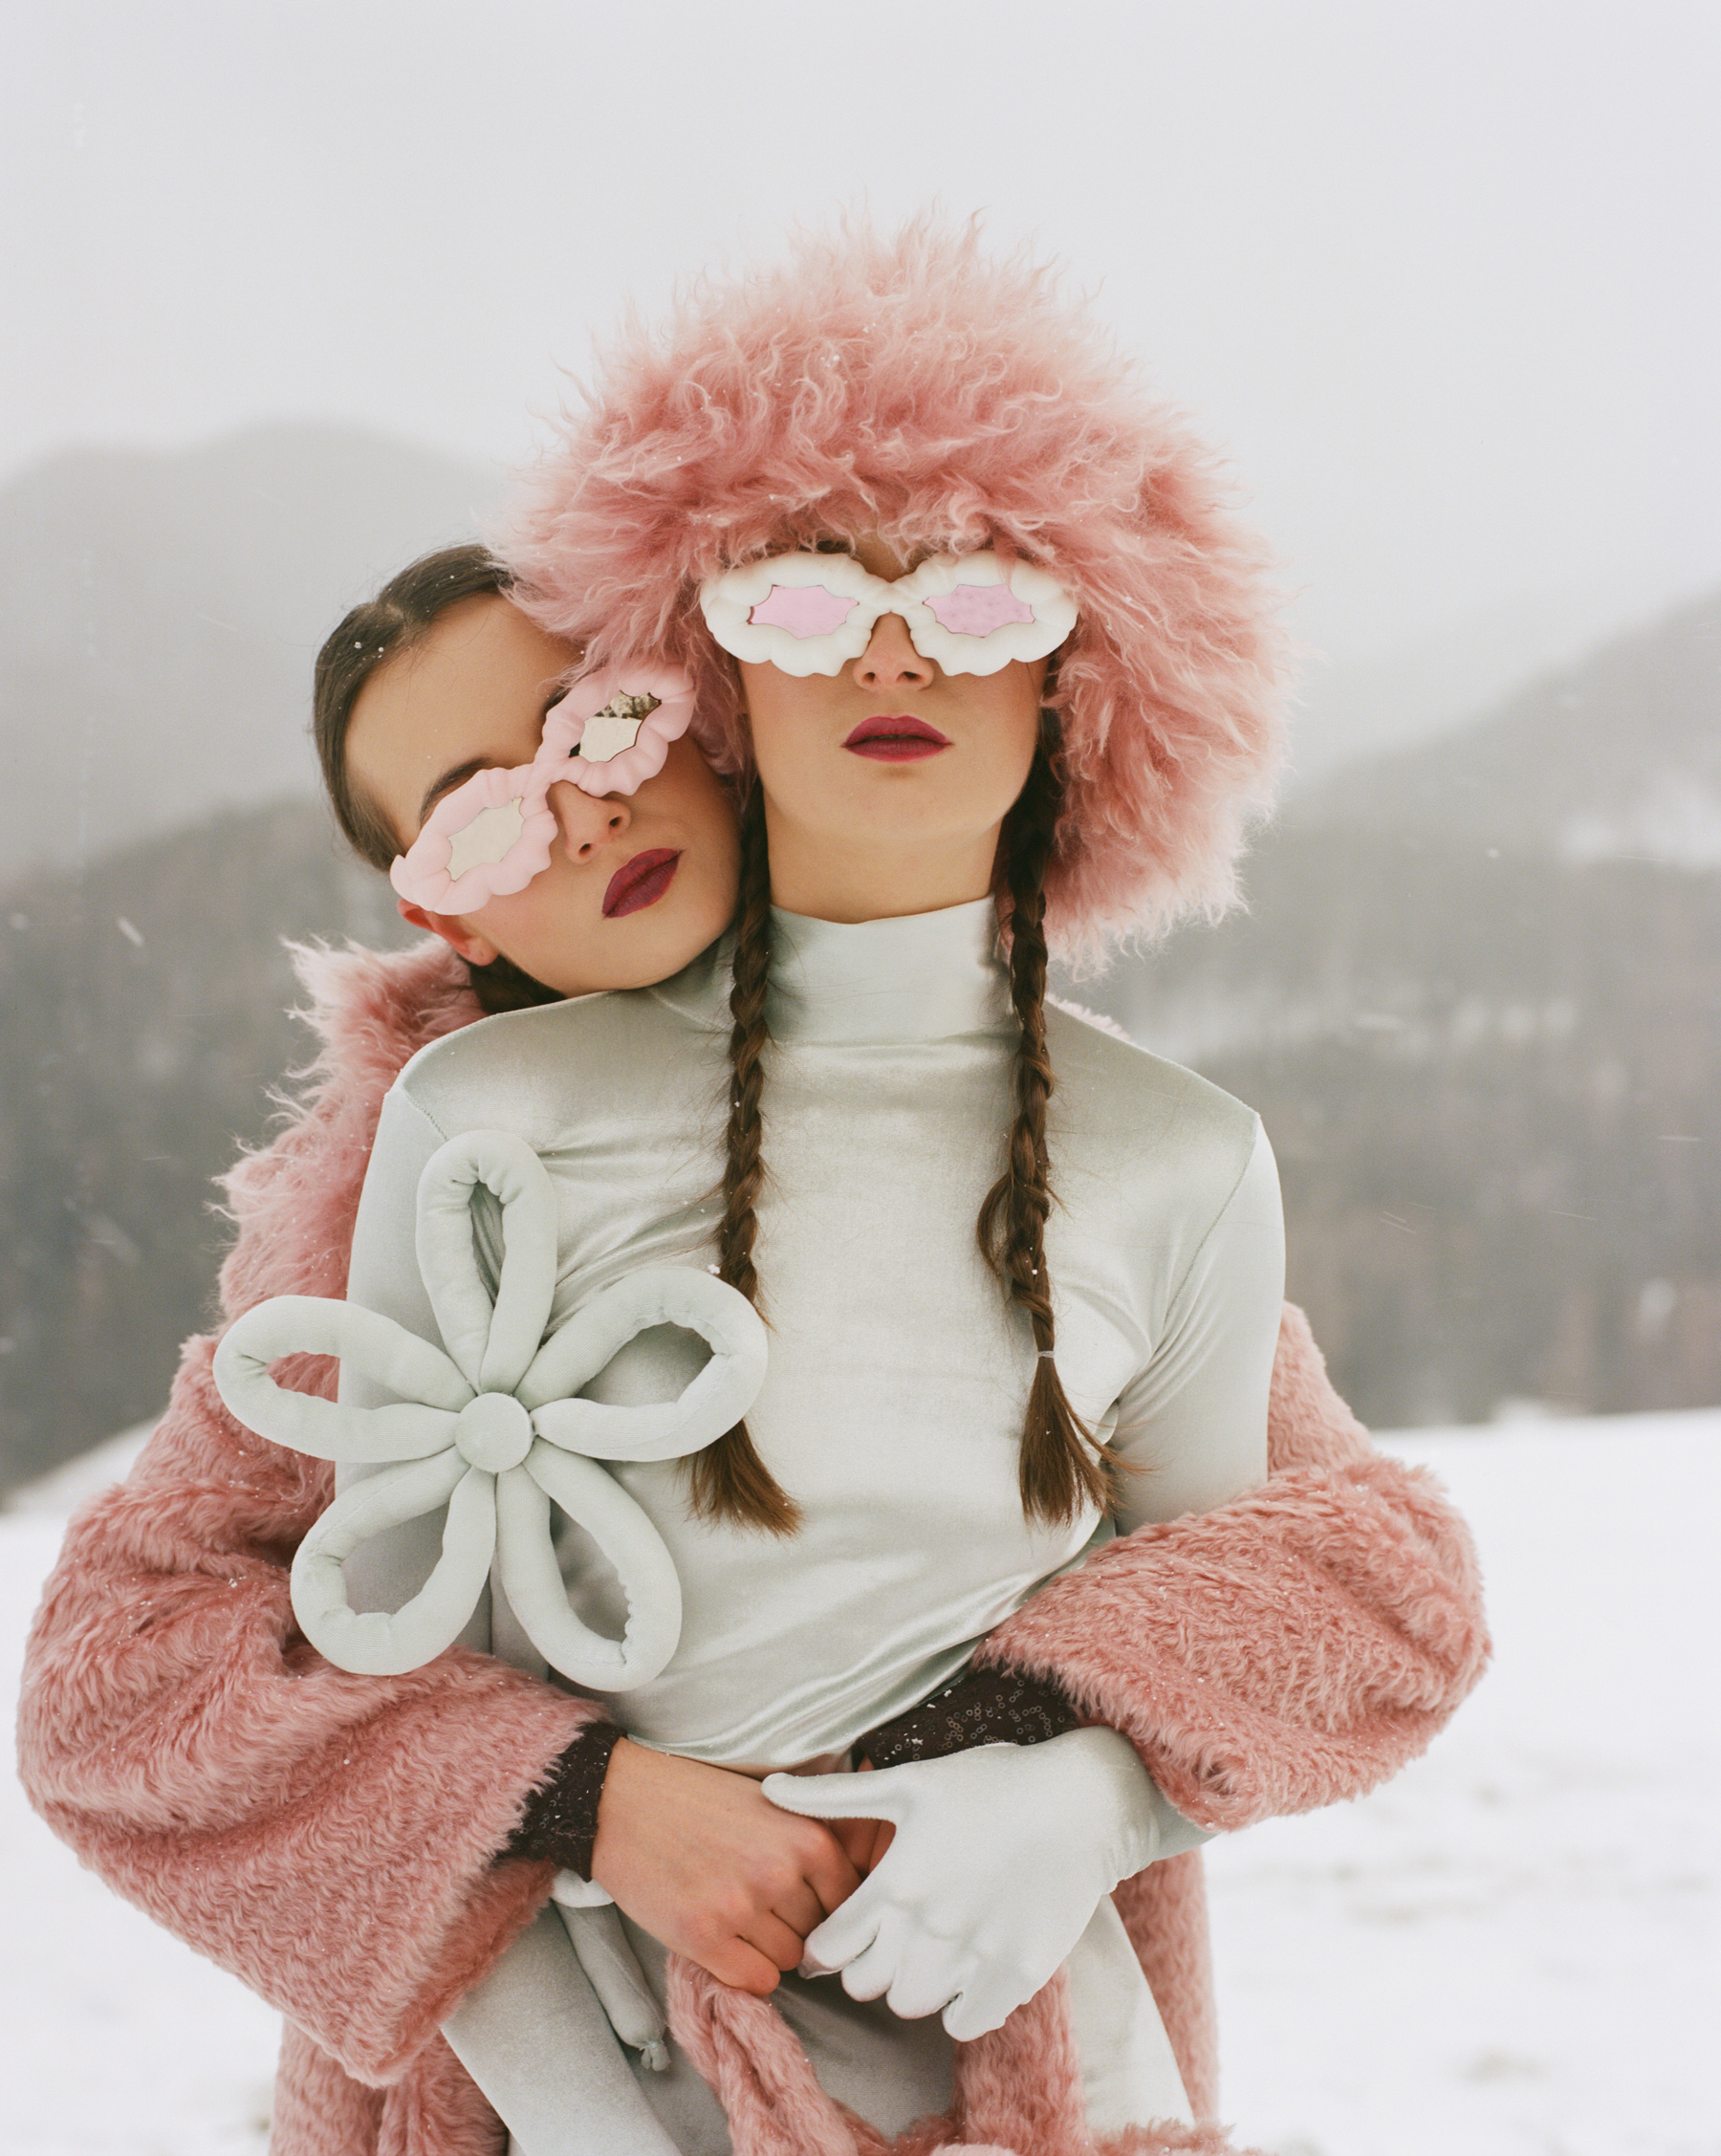 Two female models in front of a mountain landscape in the snow